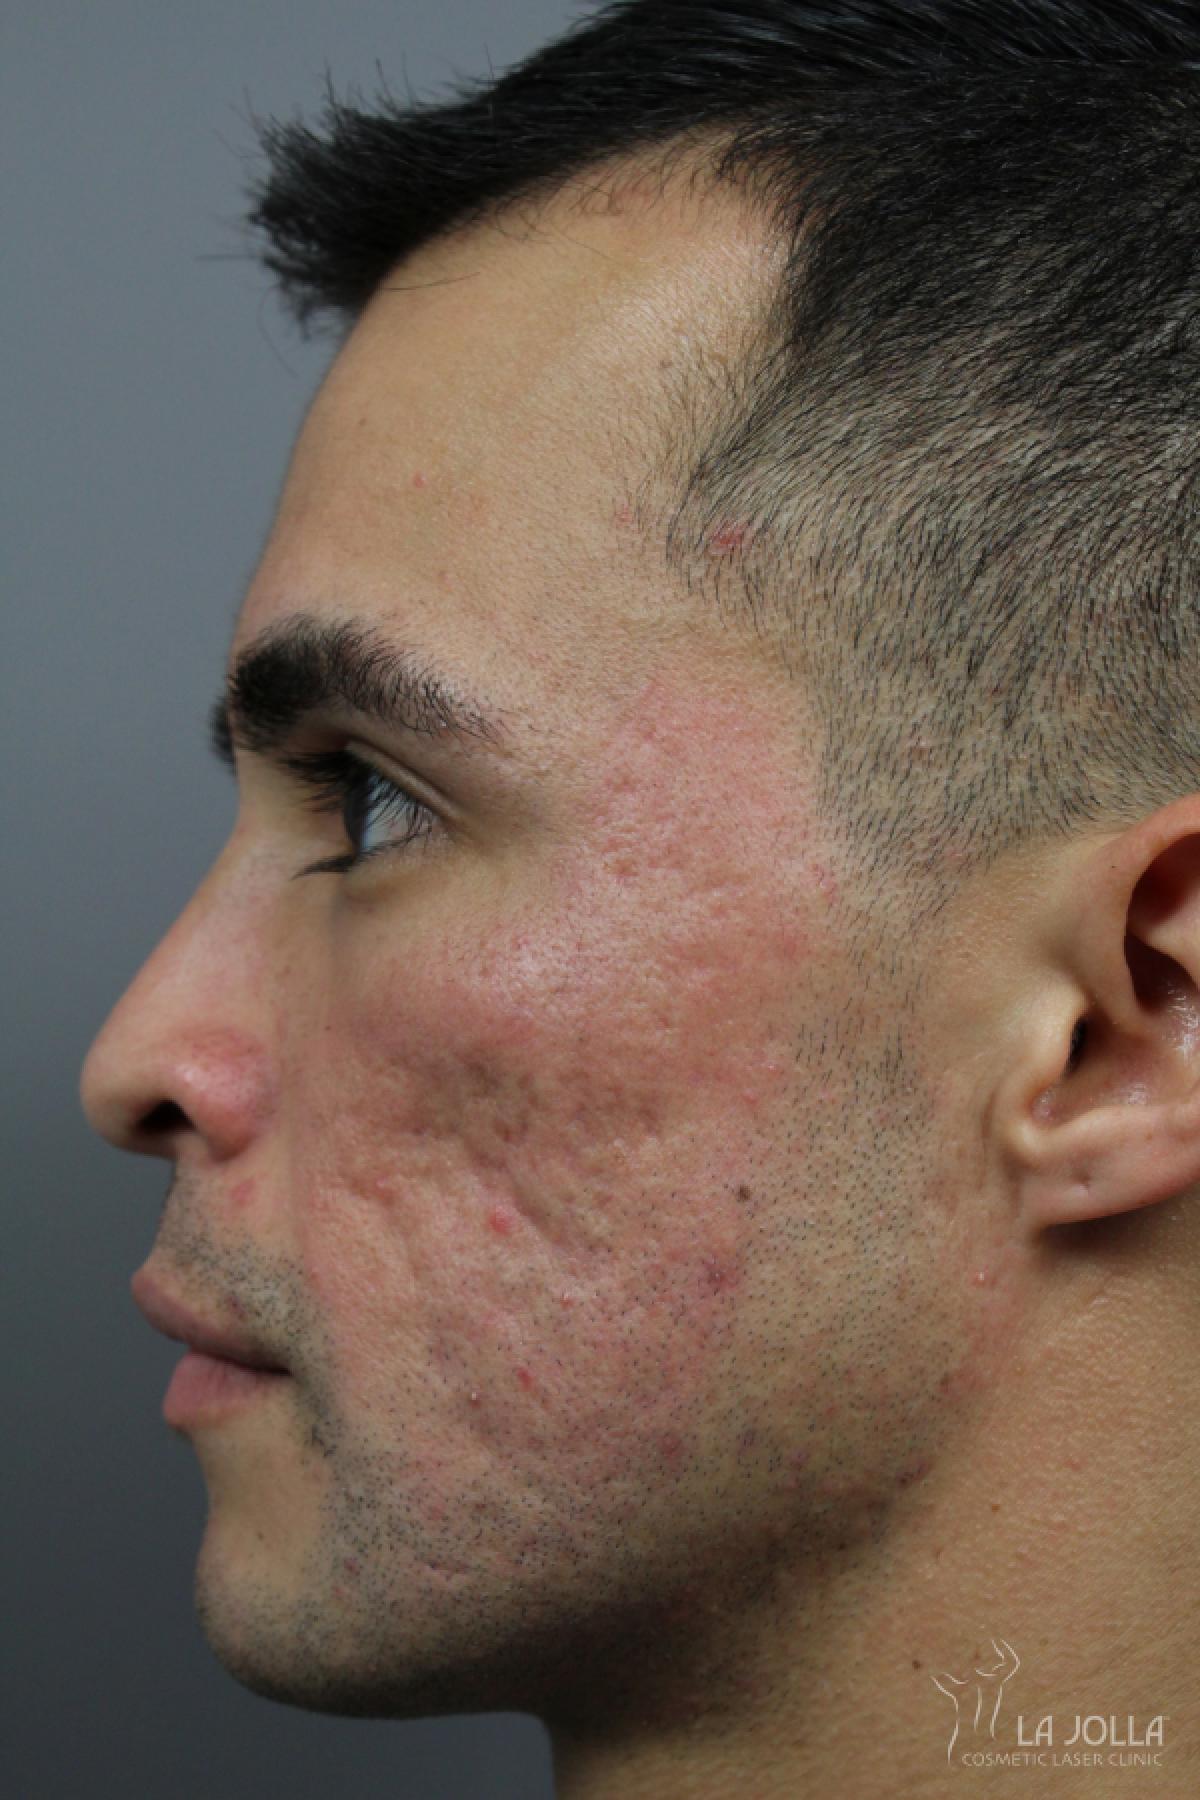 Acne Scars: Patient 4 - After 4